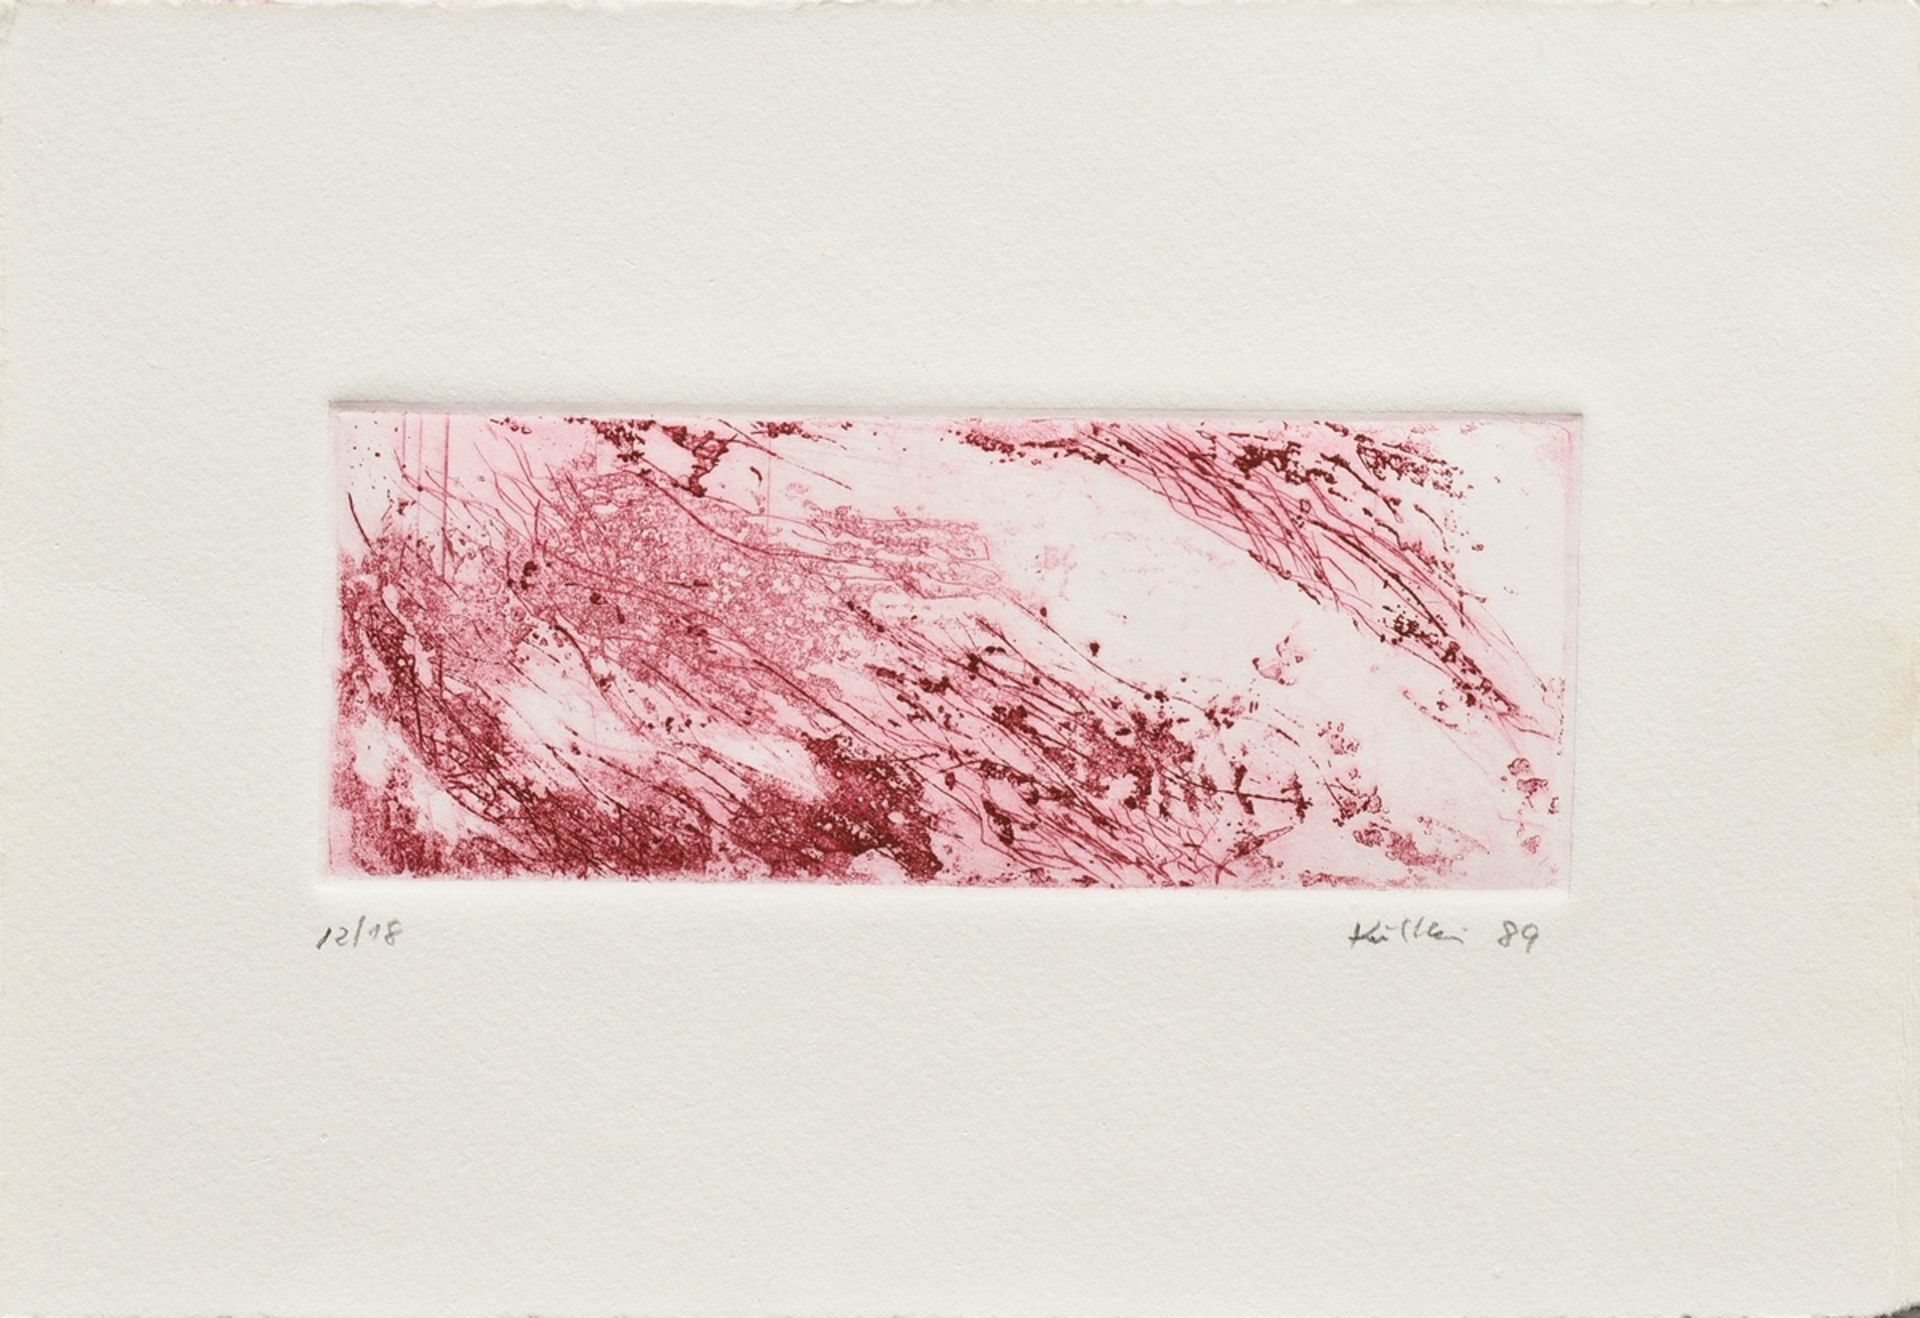 Kuckei, Peter (1938-2023) "o.T." 1989, colour etching, 12/18, b. sign./dat./num., PM 7,7x19,8cm, SM - Image 2 of 3